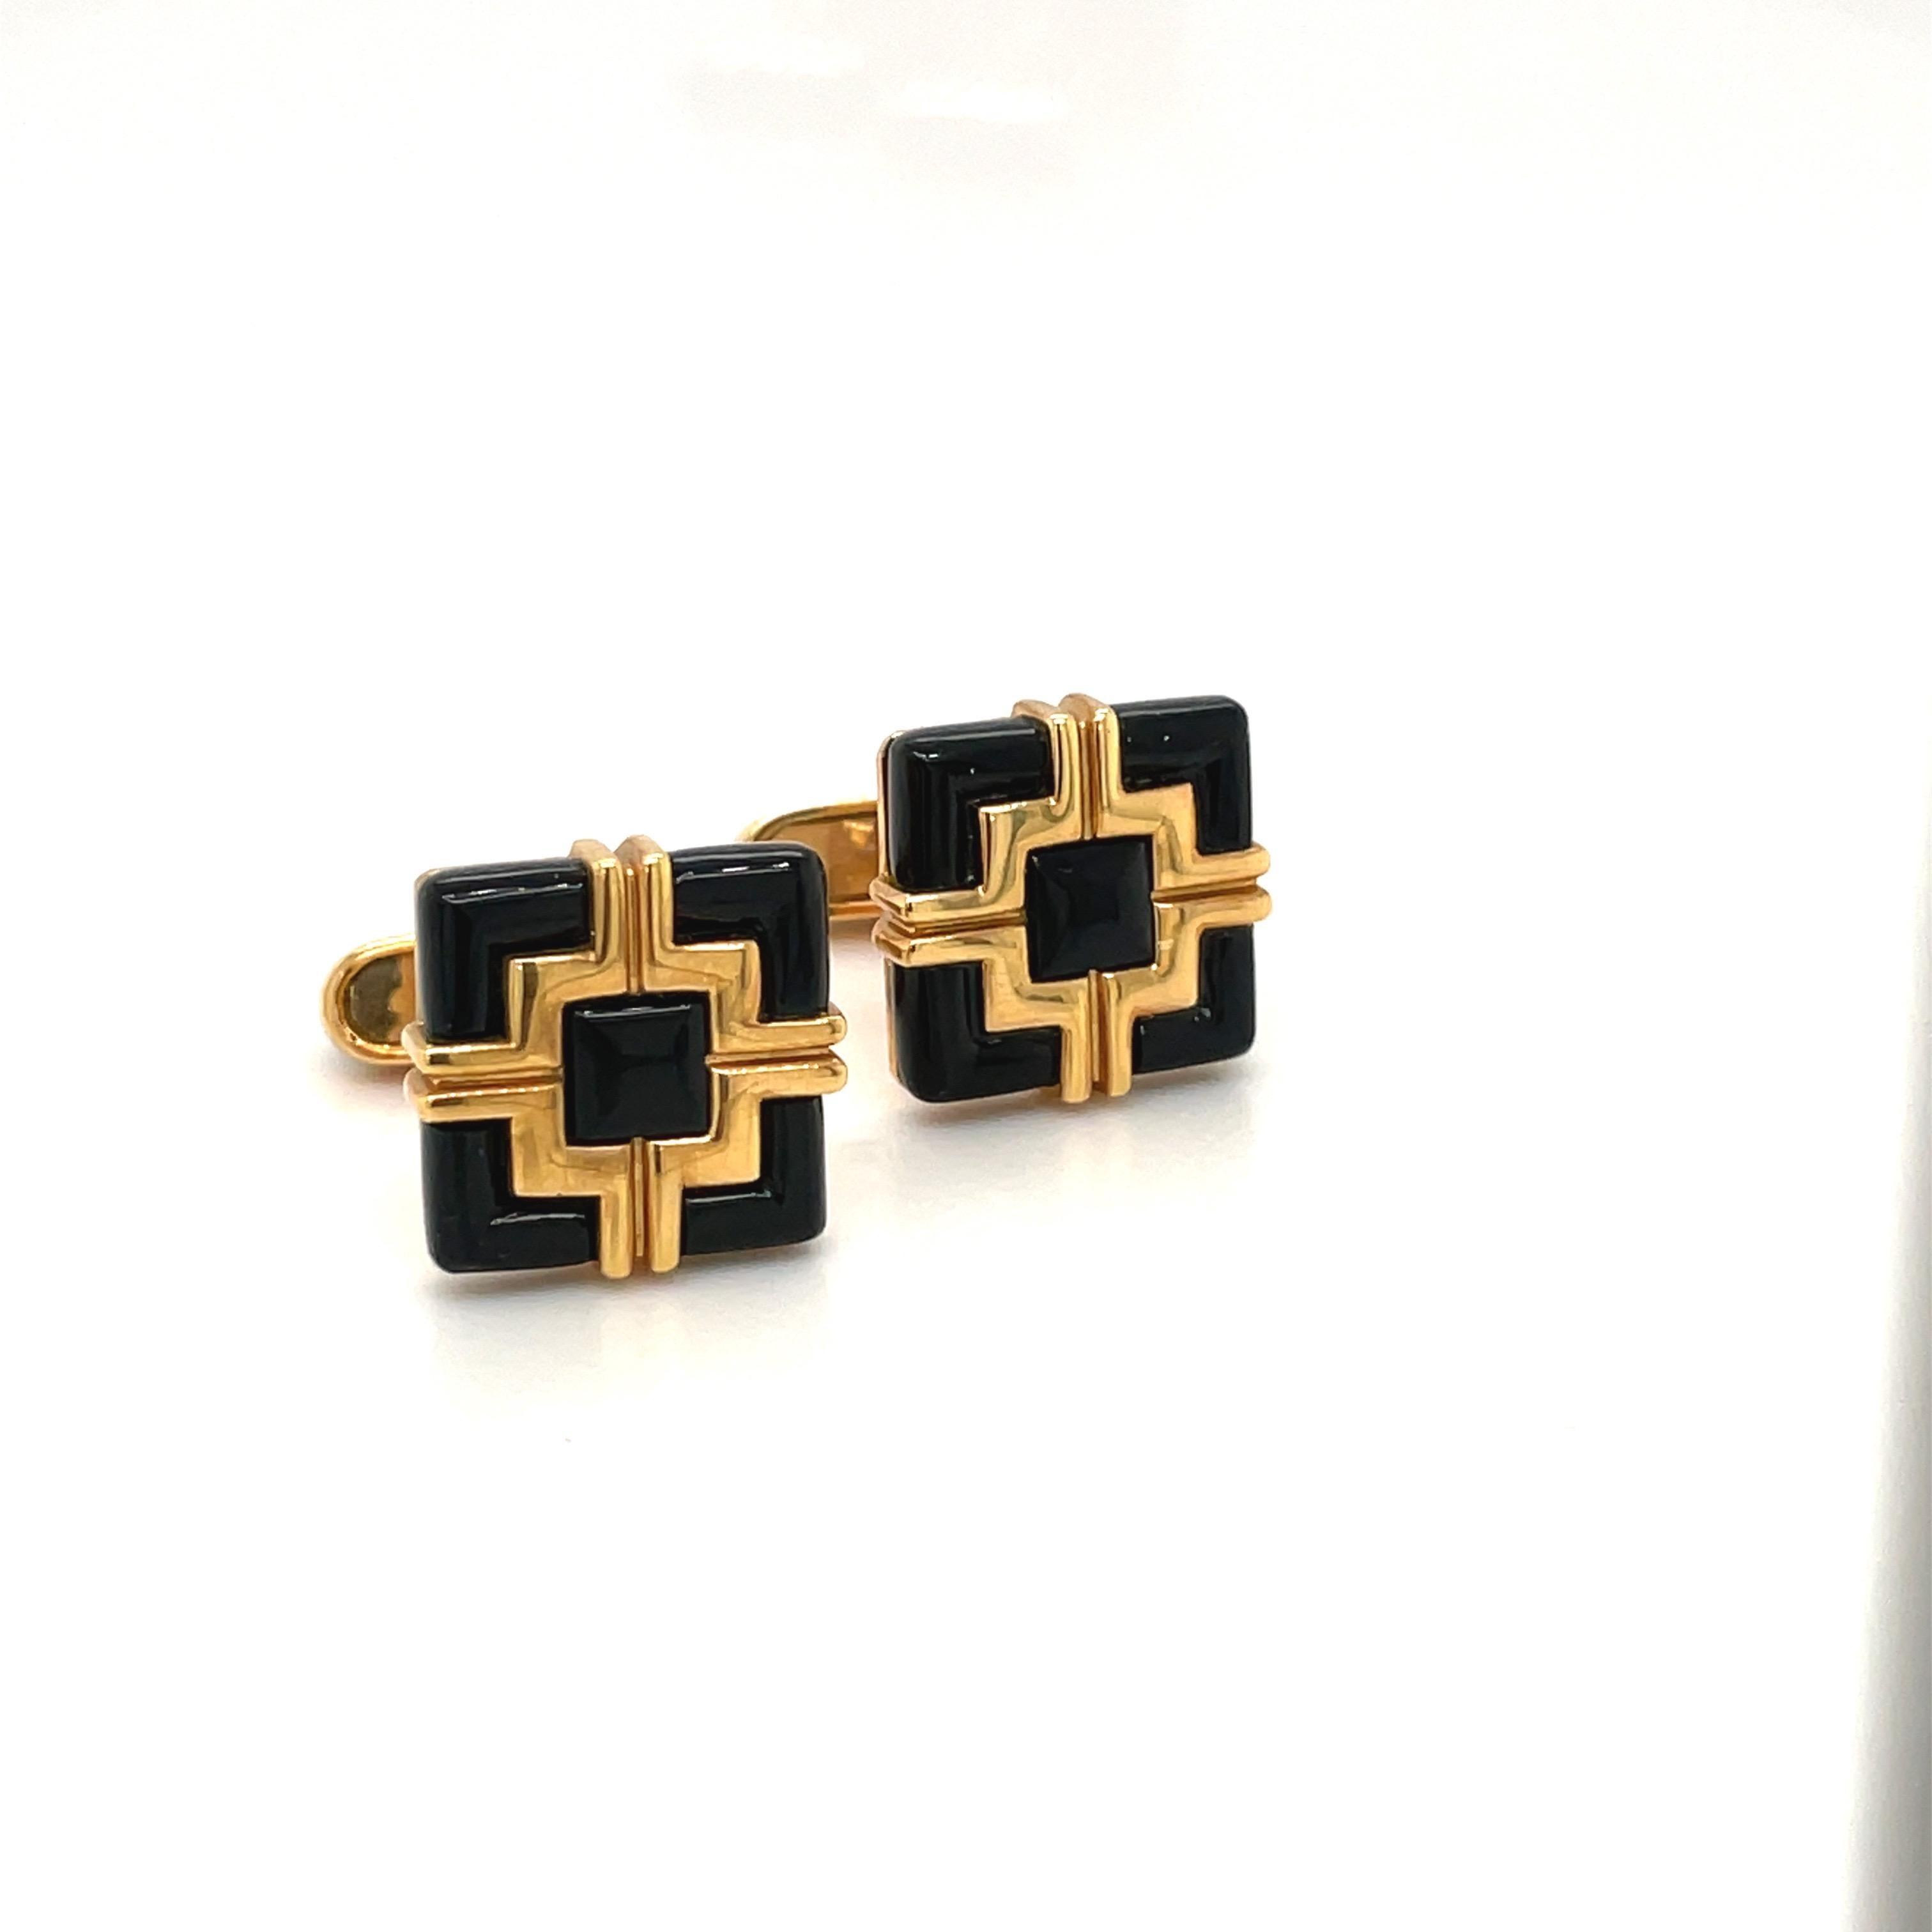 Created by George Gero, renowned worldwide for luxurious men's cuff-links, comes this classic pair in 18 karat yellow gold . The square geometric cuff links are set with black onyx and and yellow gold . They have a collapsible onyx bar style back